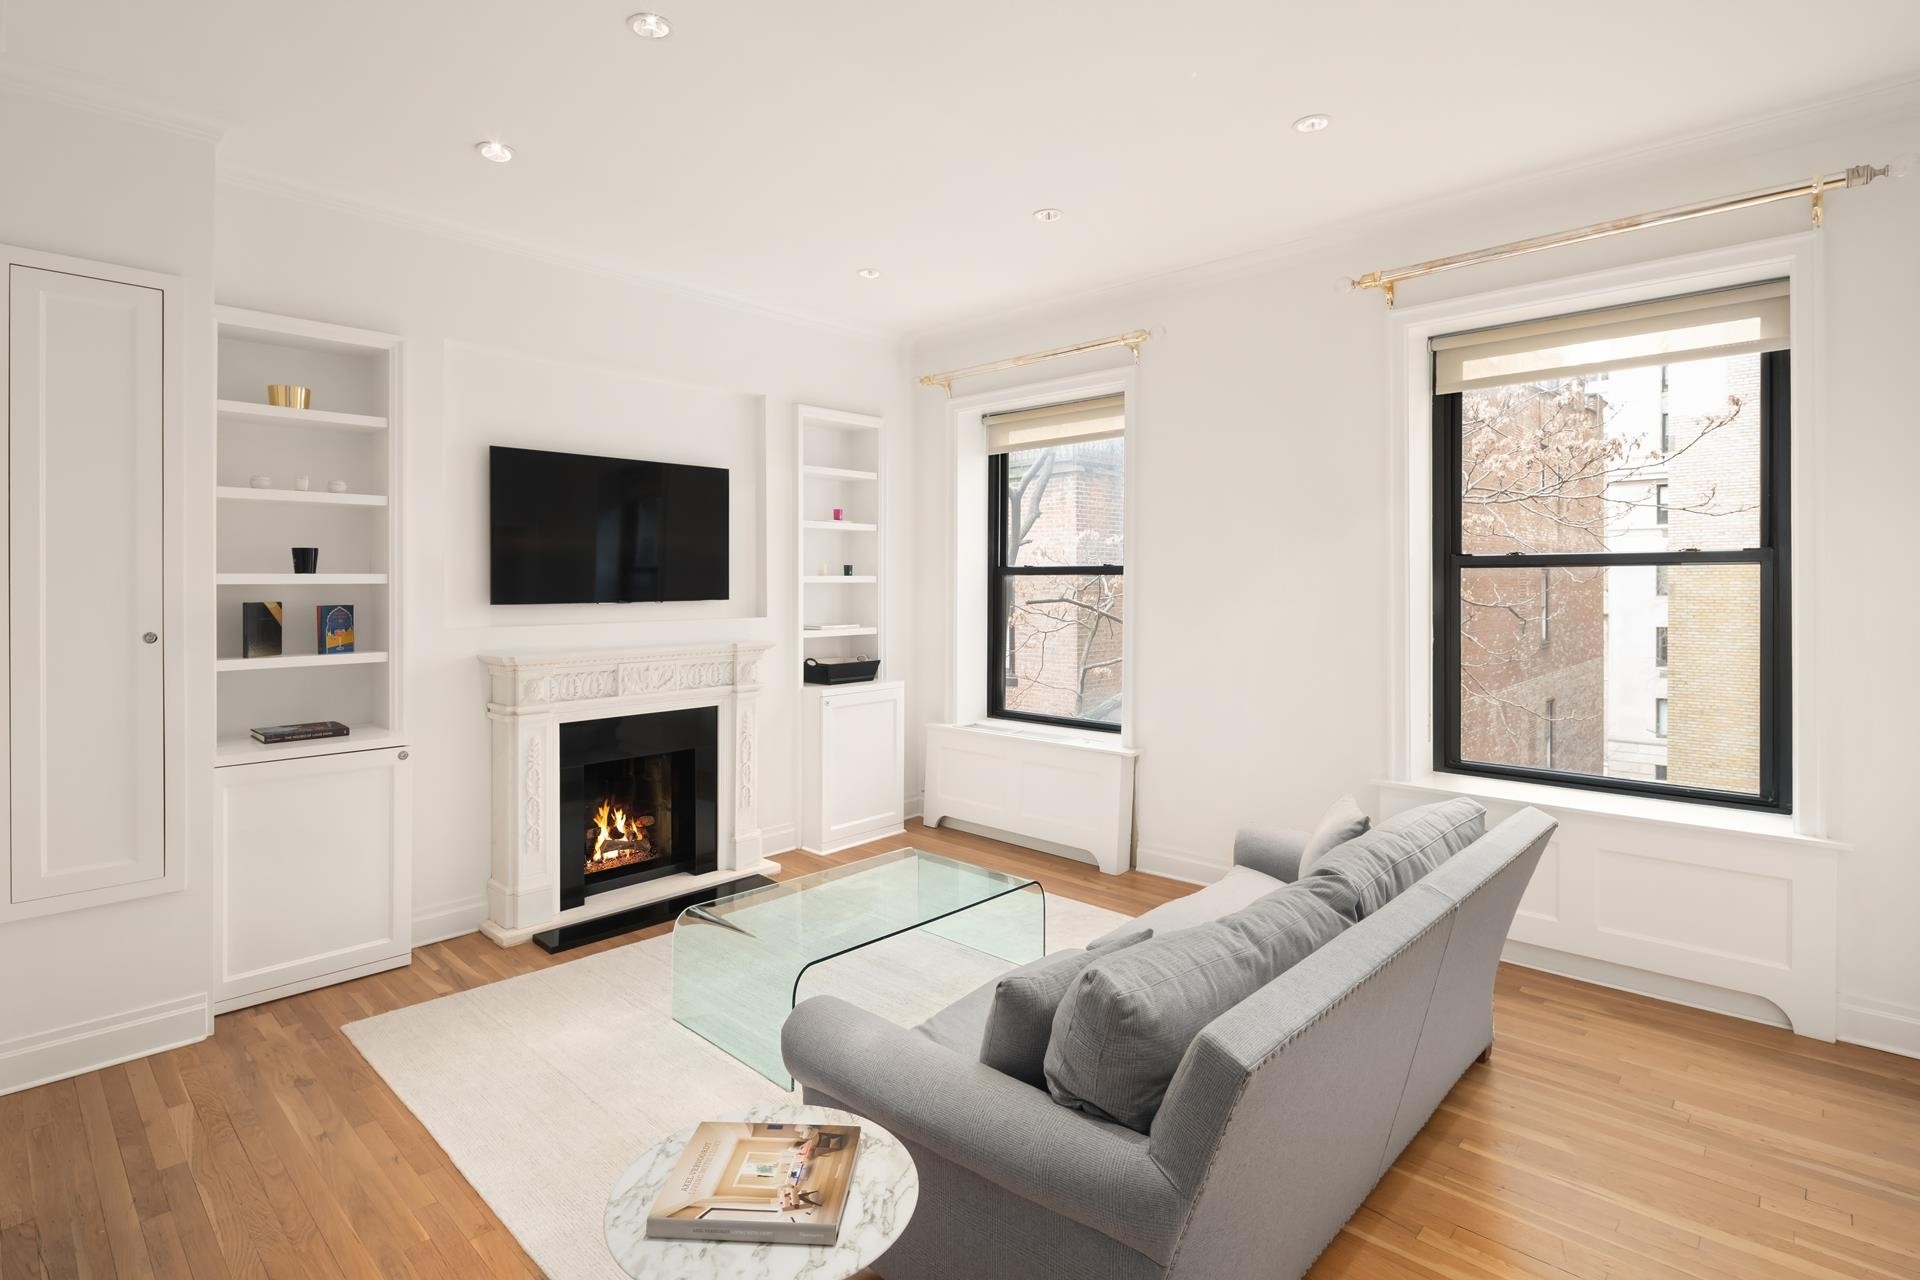 3. Co-op Properties for Sale at 55 E 65TH ST, 4A Lenox Hill, New York, New York 10065